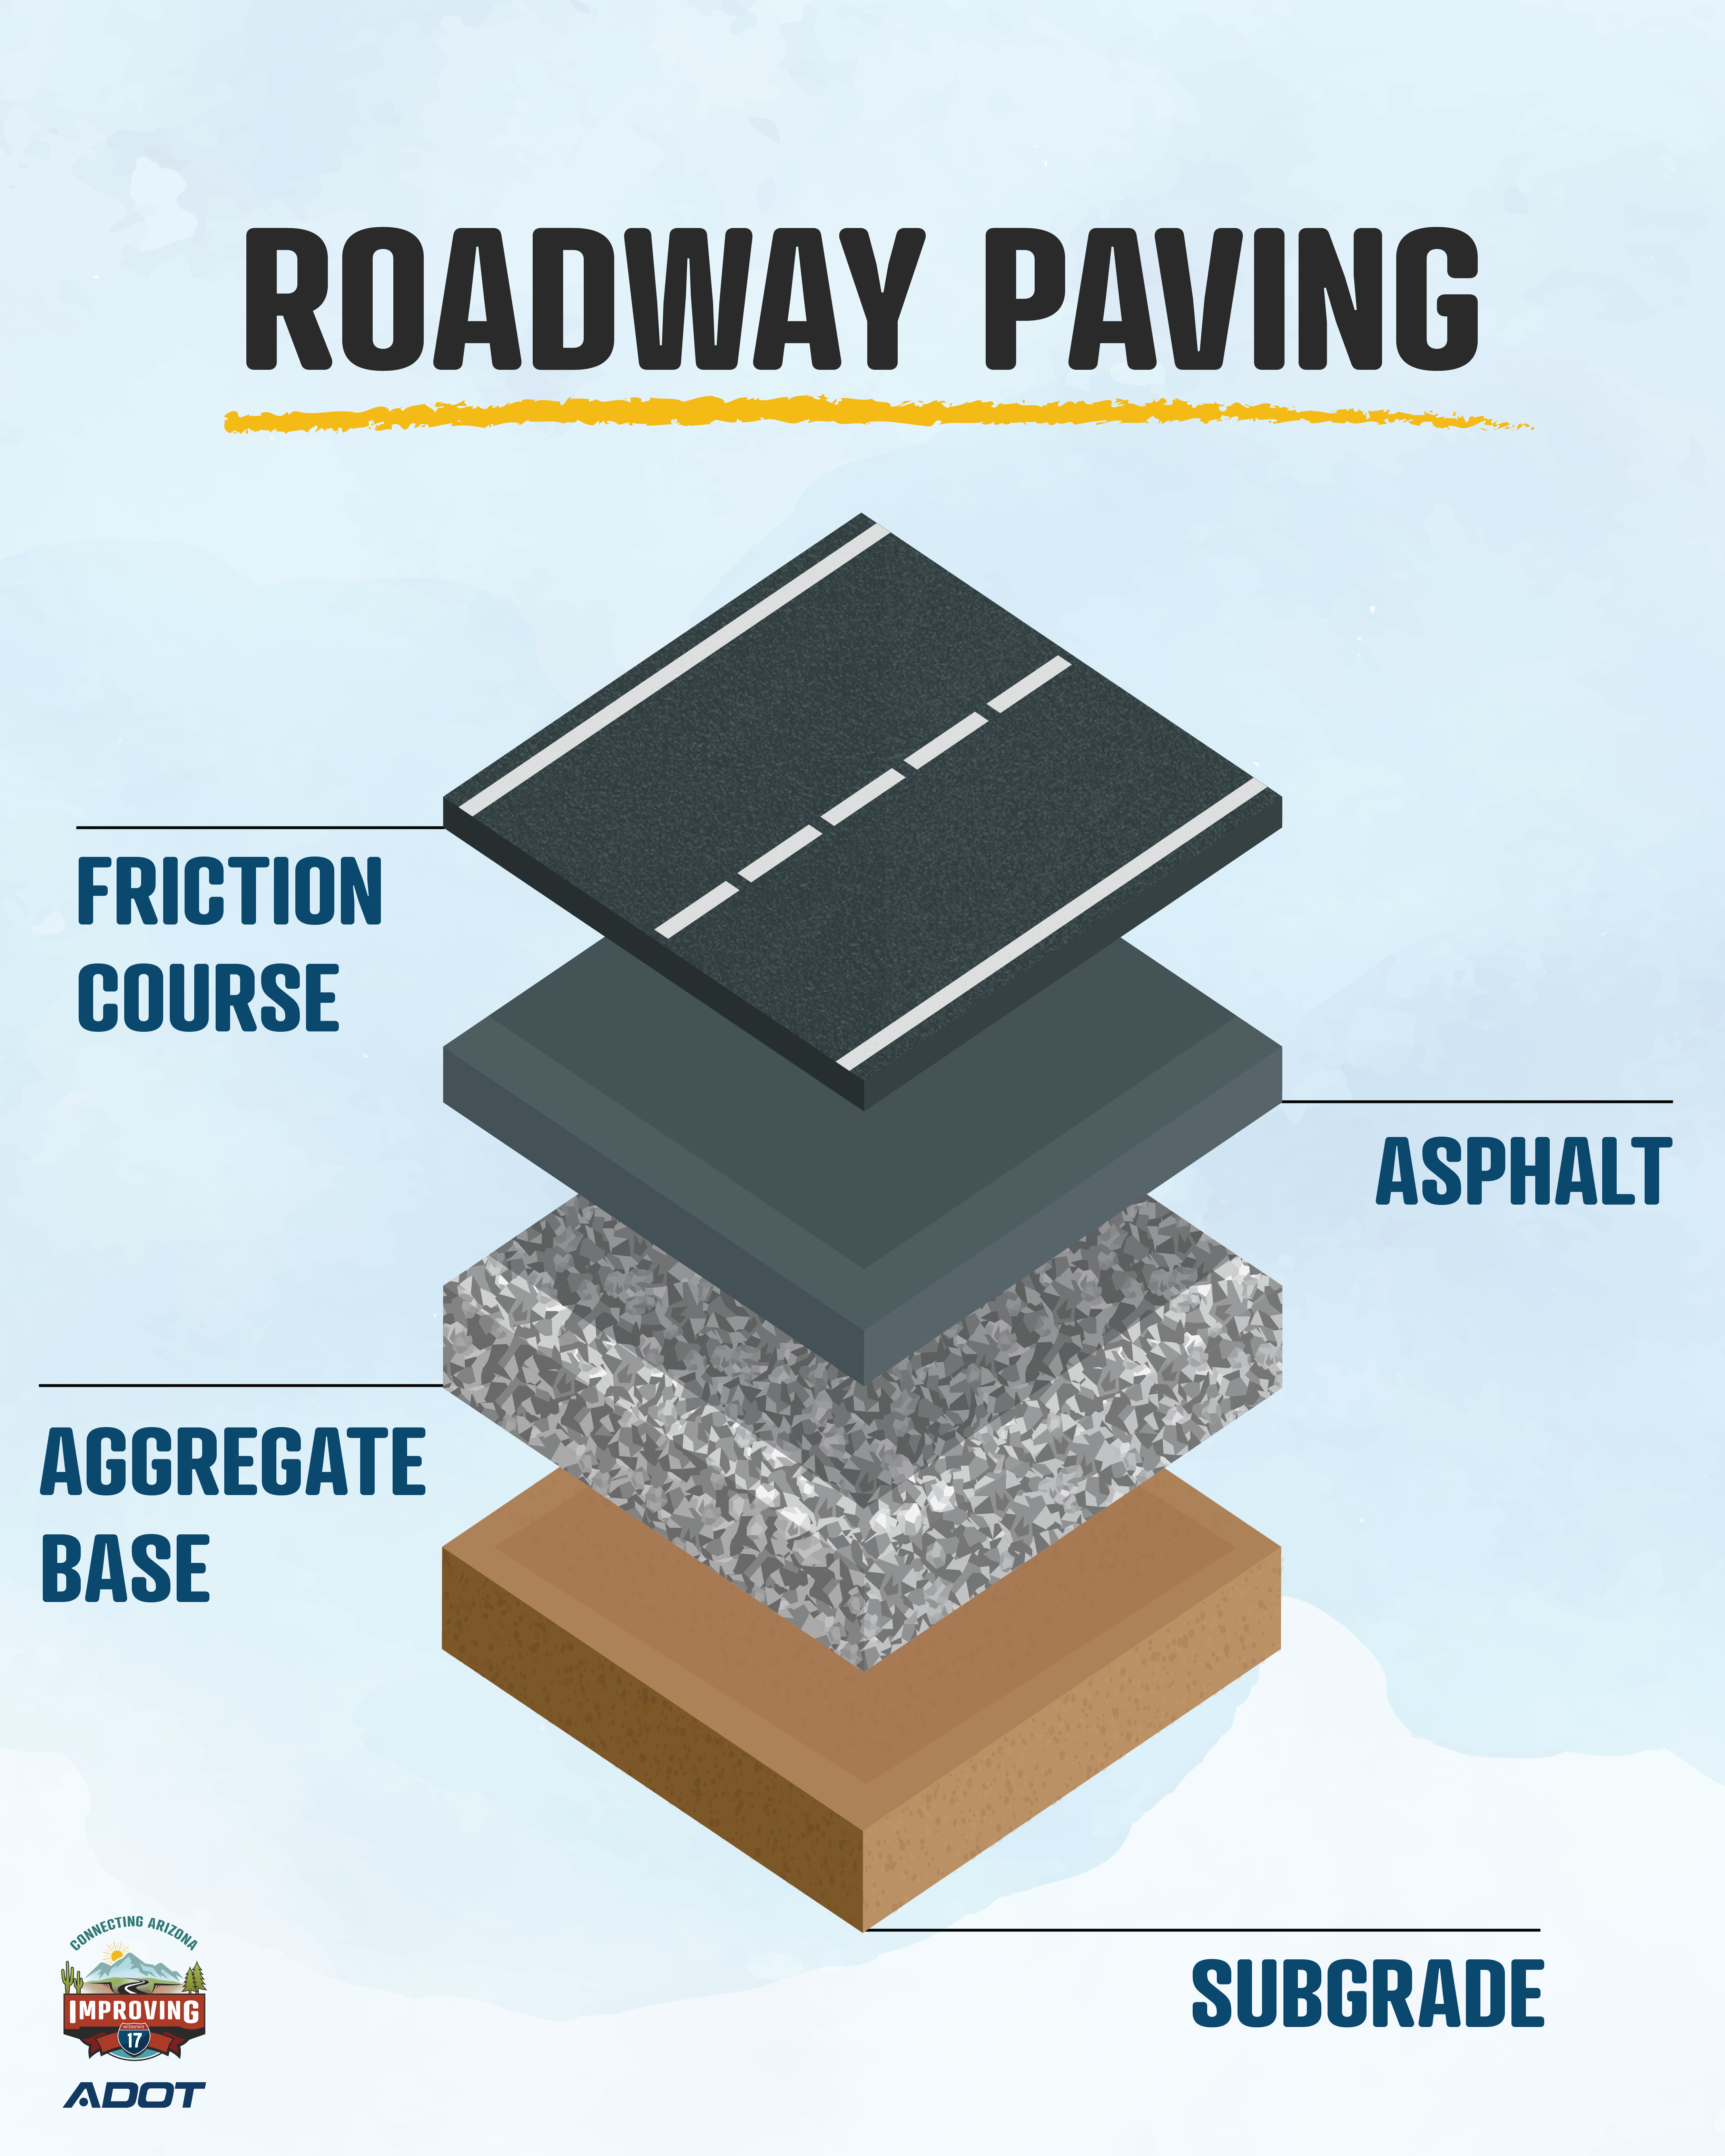 A graphic contsing the the four levels of paving: Subgrade, Aggregate Base, Asphalt, and Friction Course.